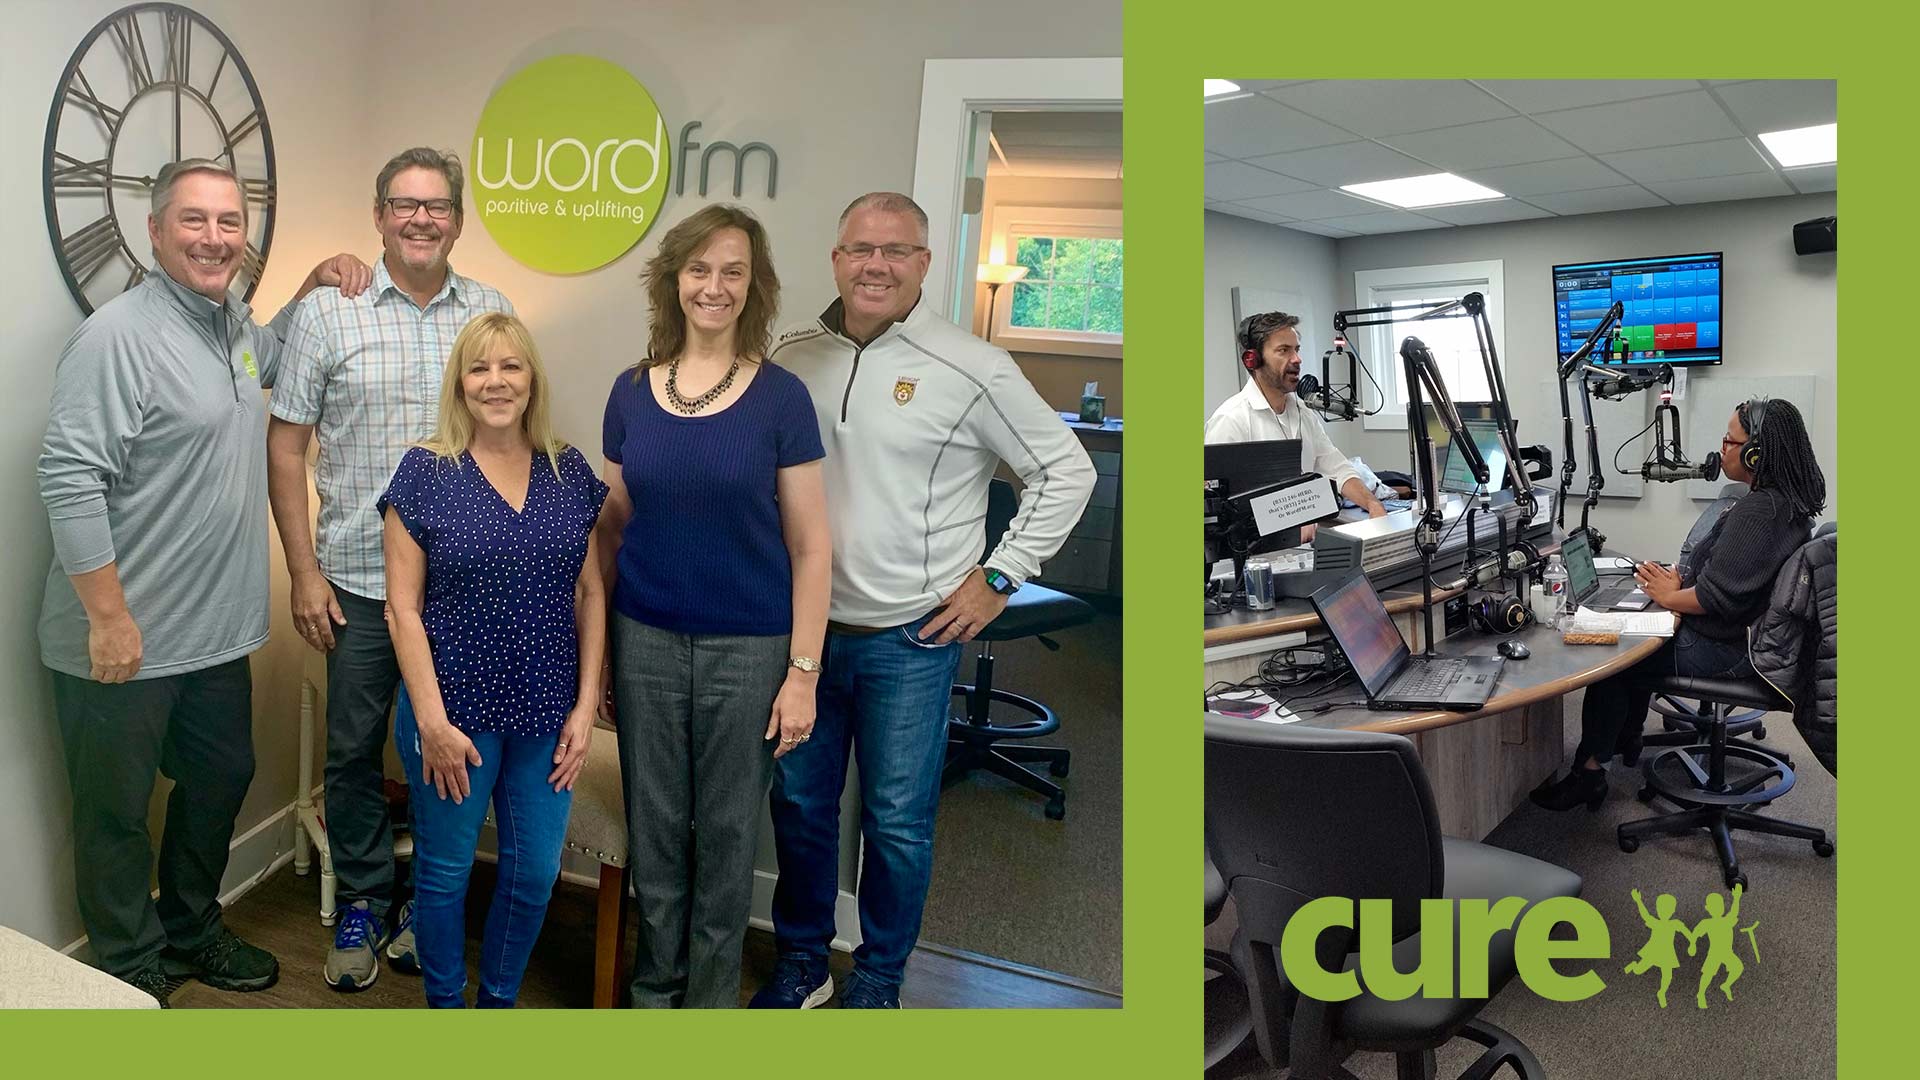 CURE’s Partnership with Word FM Makes Miracles Possible